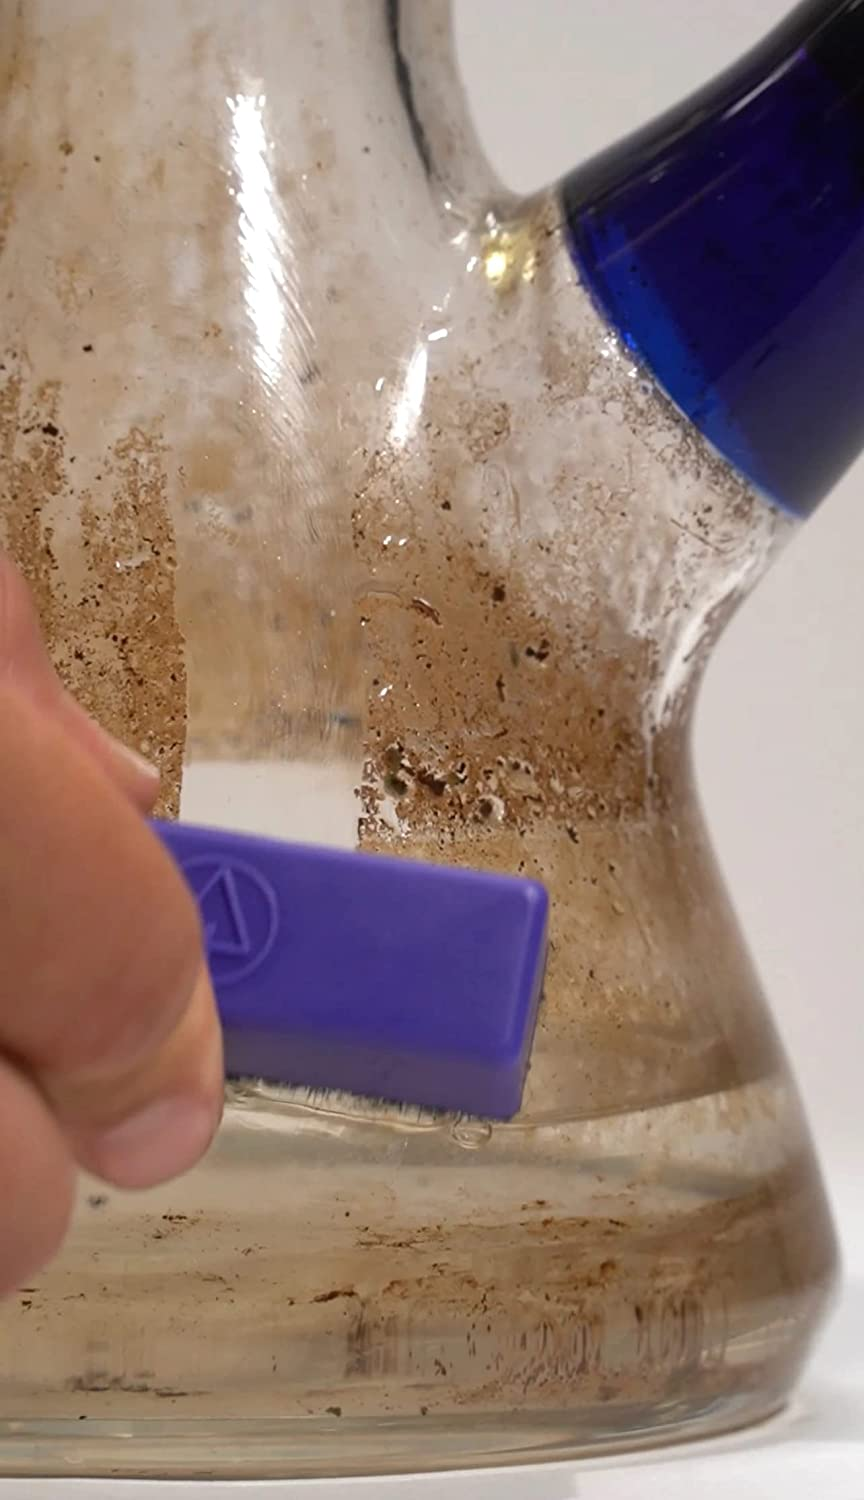 The Borobuddy Magnetic Glass Cleaner